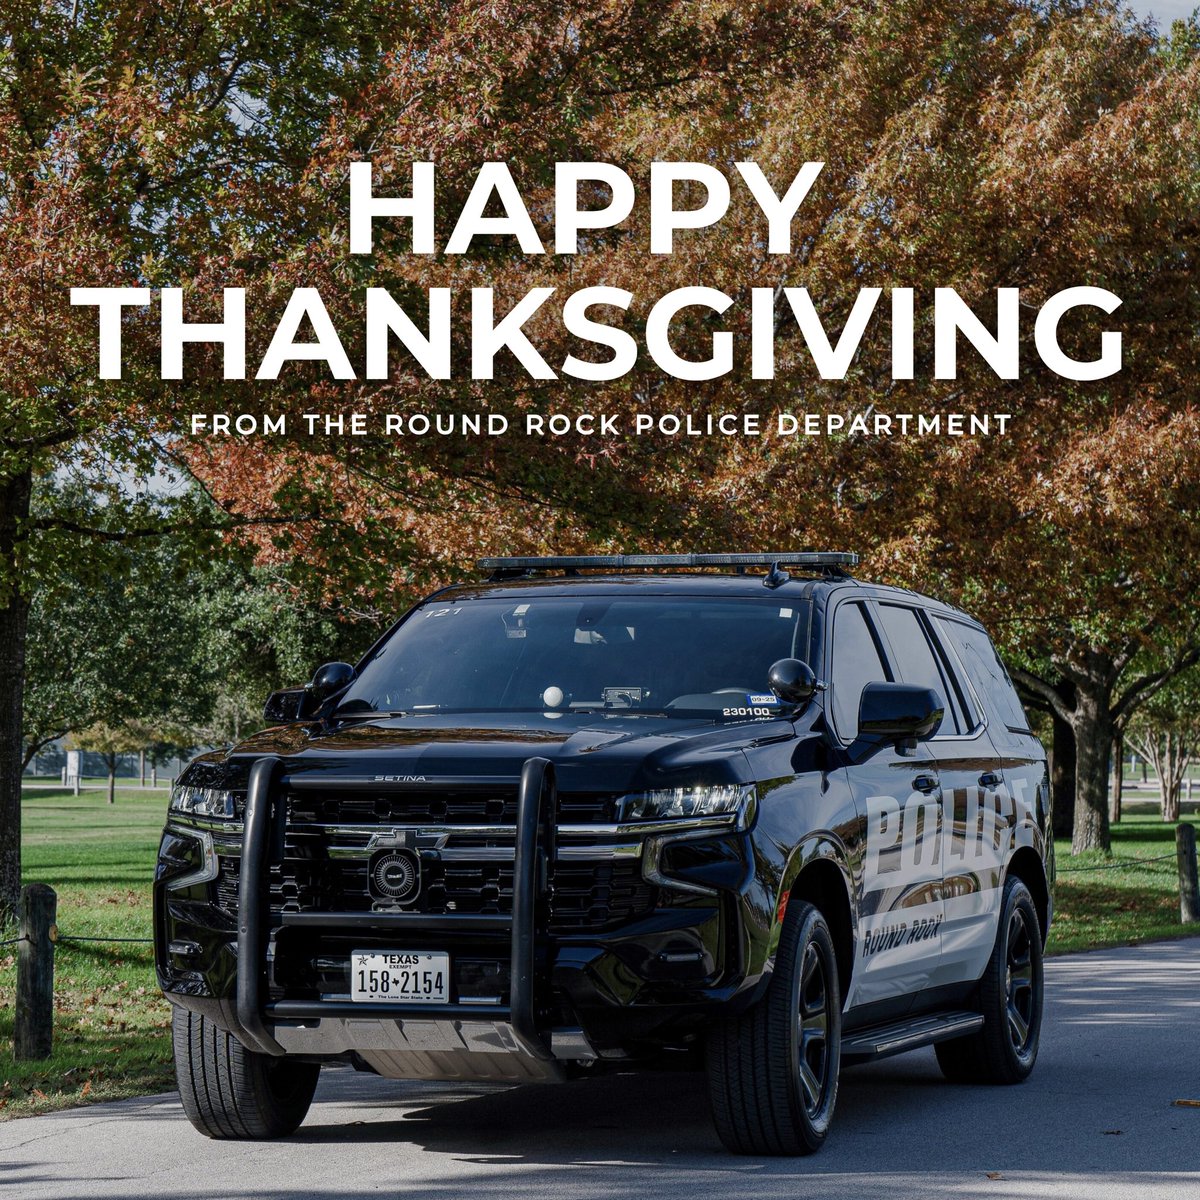 Happy Thanksgiving from all of us at the Round Rock Police Department!   In the spirit of gratitude, we extend our heartfelt thanks to each and every member of our community for your unwavering support.   #UnityInOneCommUNITY